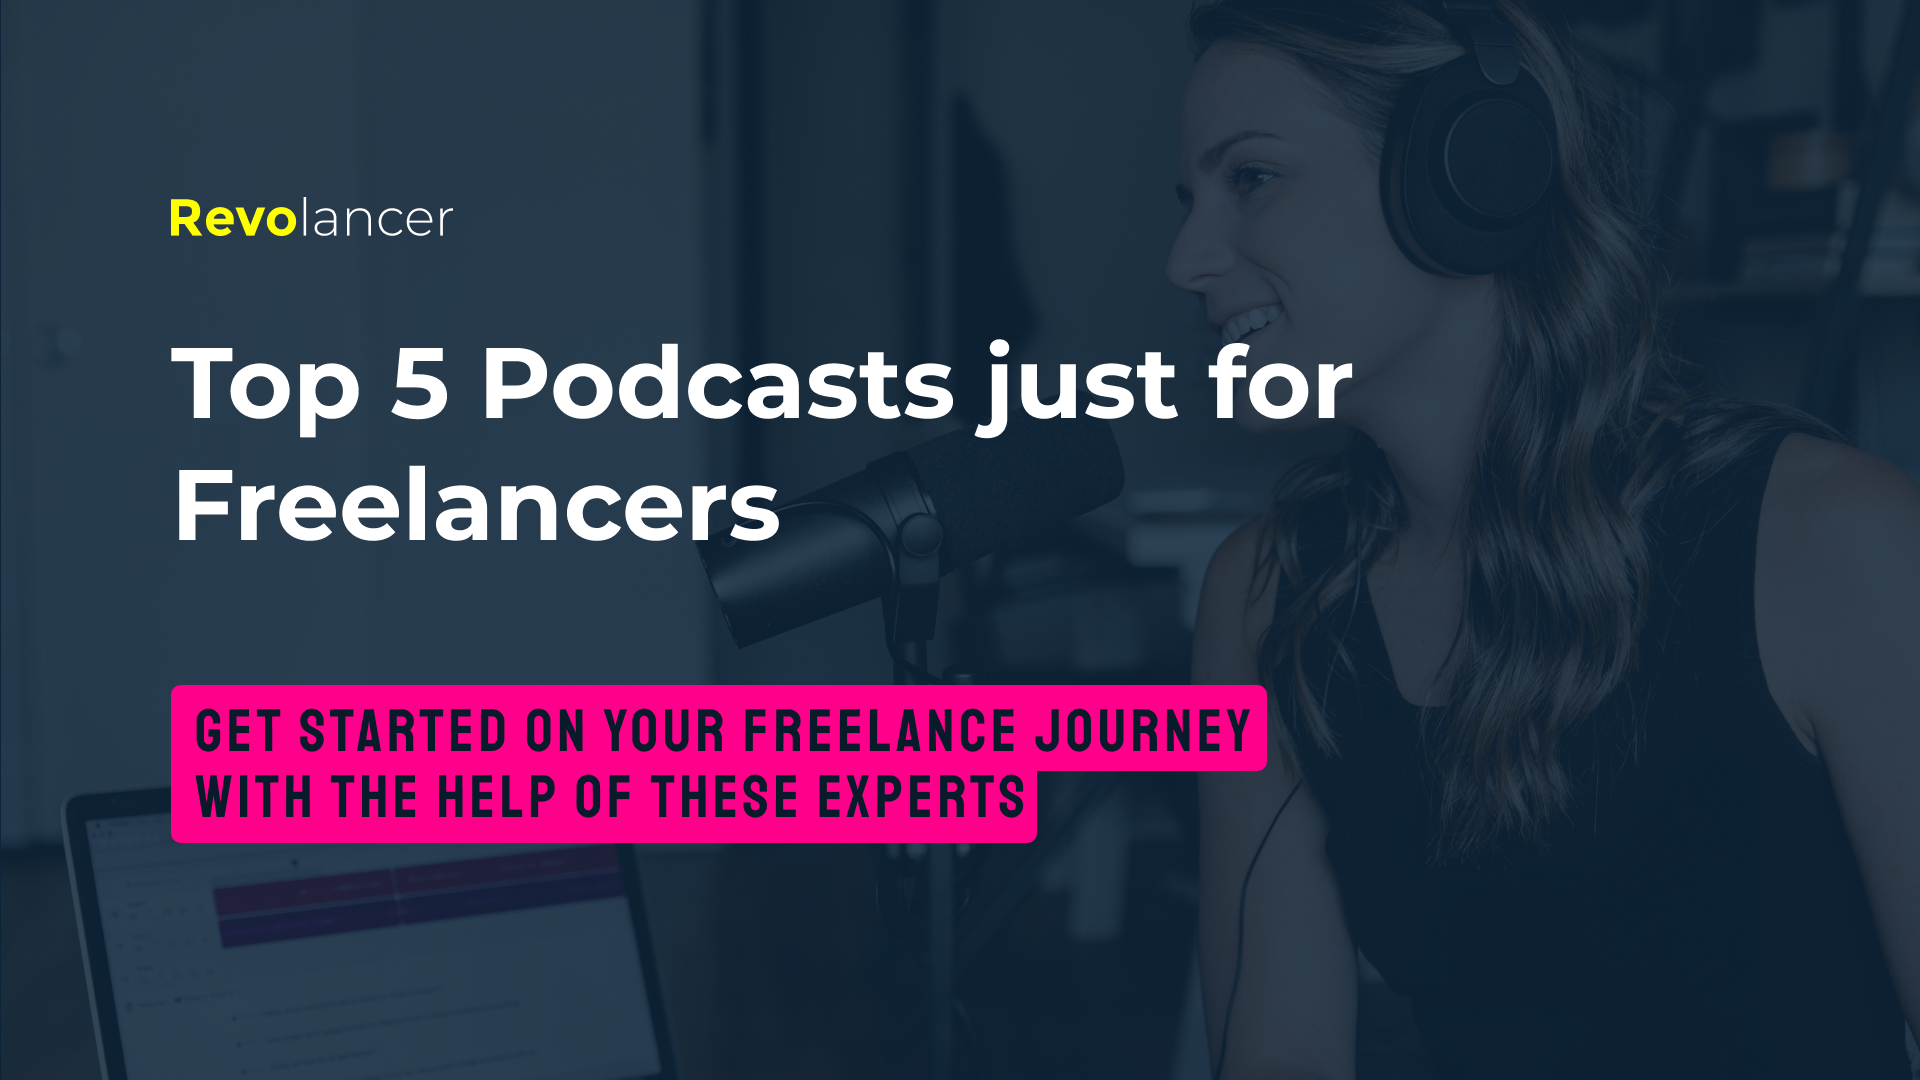 Top 5 Podcasts just for Freelancers